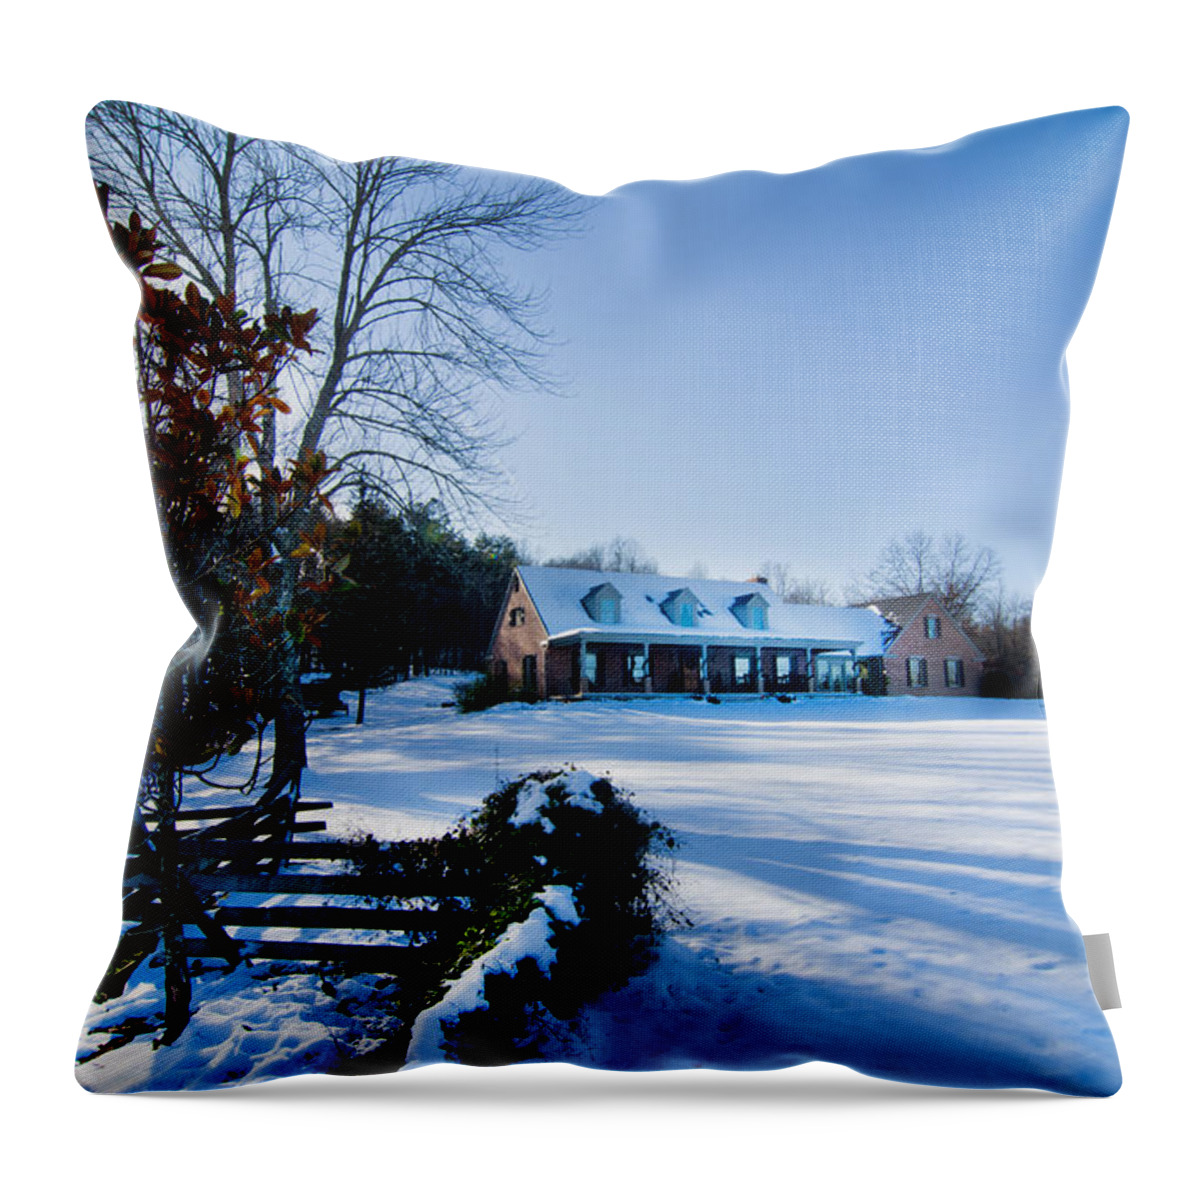 Winters Day Five Throw Pillow featuring the photograph Winters Day Five by Randall Branham